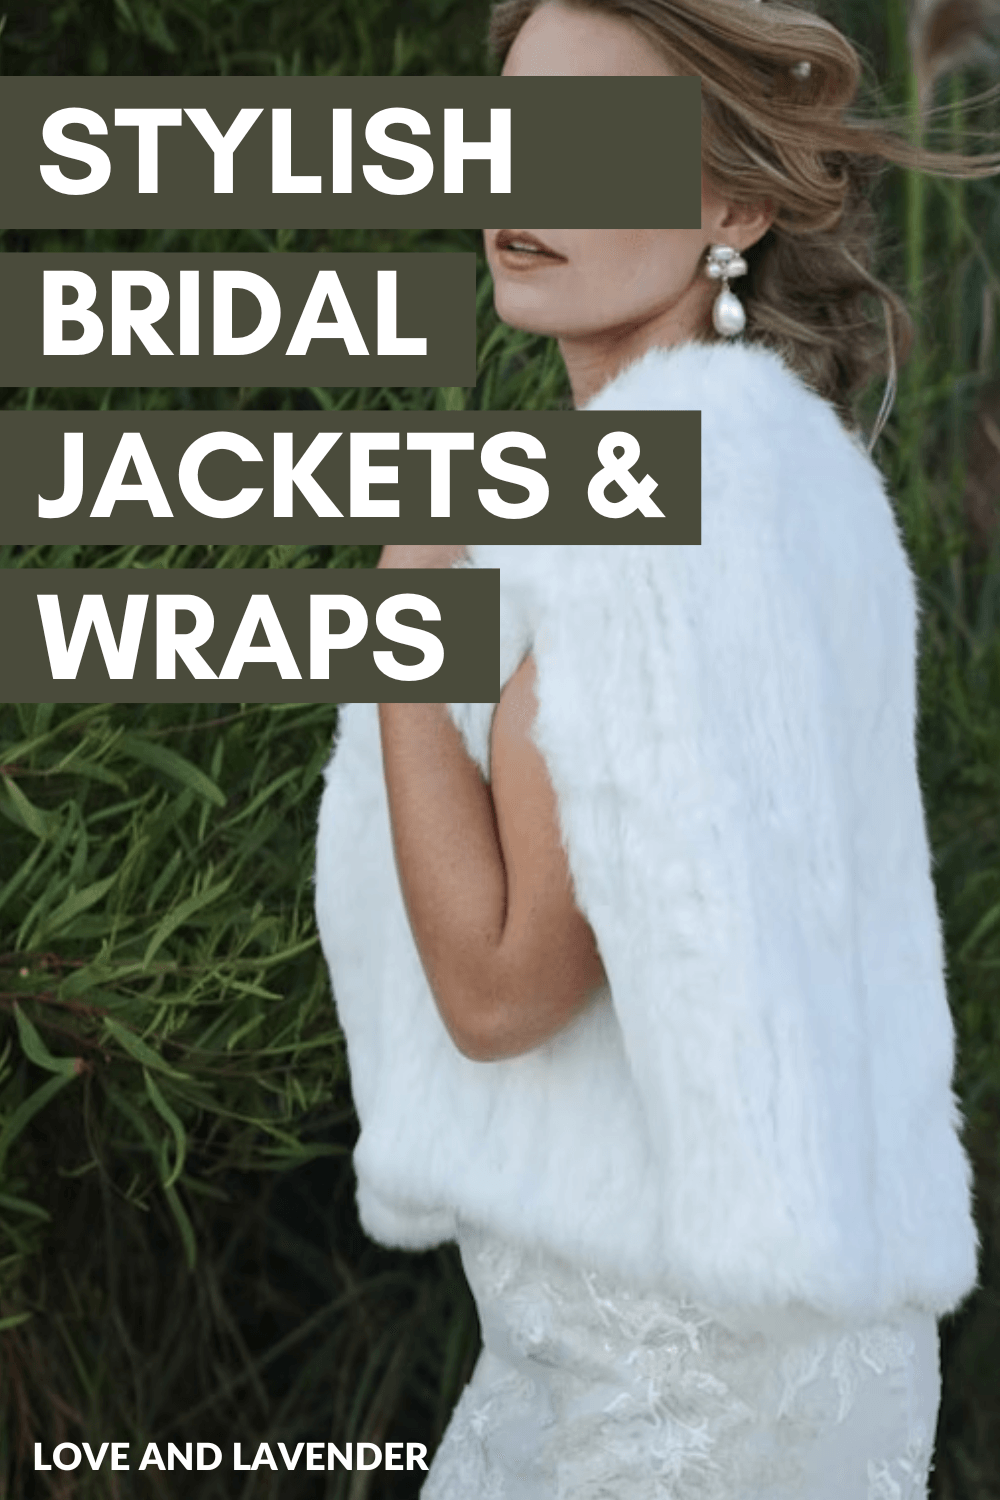 It can be difficult to know which jacket is right for your wedding day. You'll want something stylish, with an elegant style that will make you feel like a queen during your big days but you don't want to spend thousands of dollars on a new wardrobe just for one event. If this sounds familiar, then you need a list of Bridal Jackets Wraps to Match a Fall Wedding Gown. This guide will walk you through the steps of finding the most flattering cover-up for your wedding day plus options that work well into the future so you can wear them again!